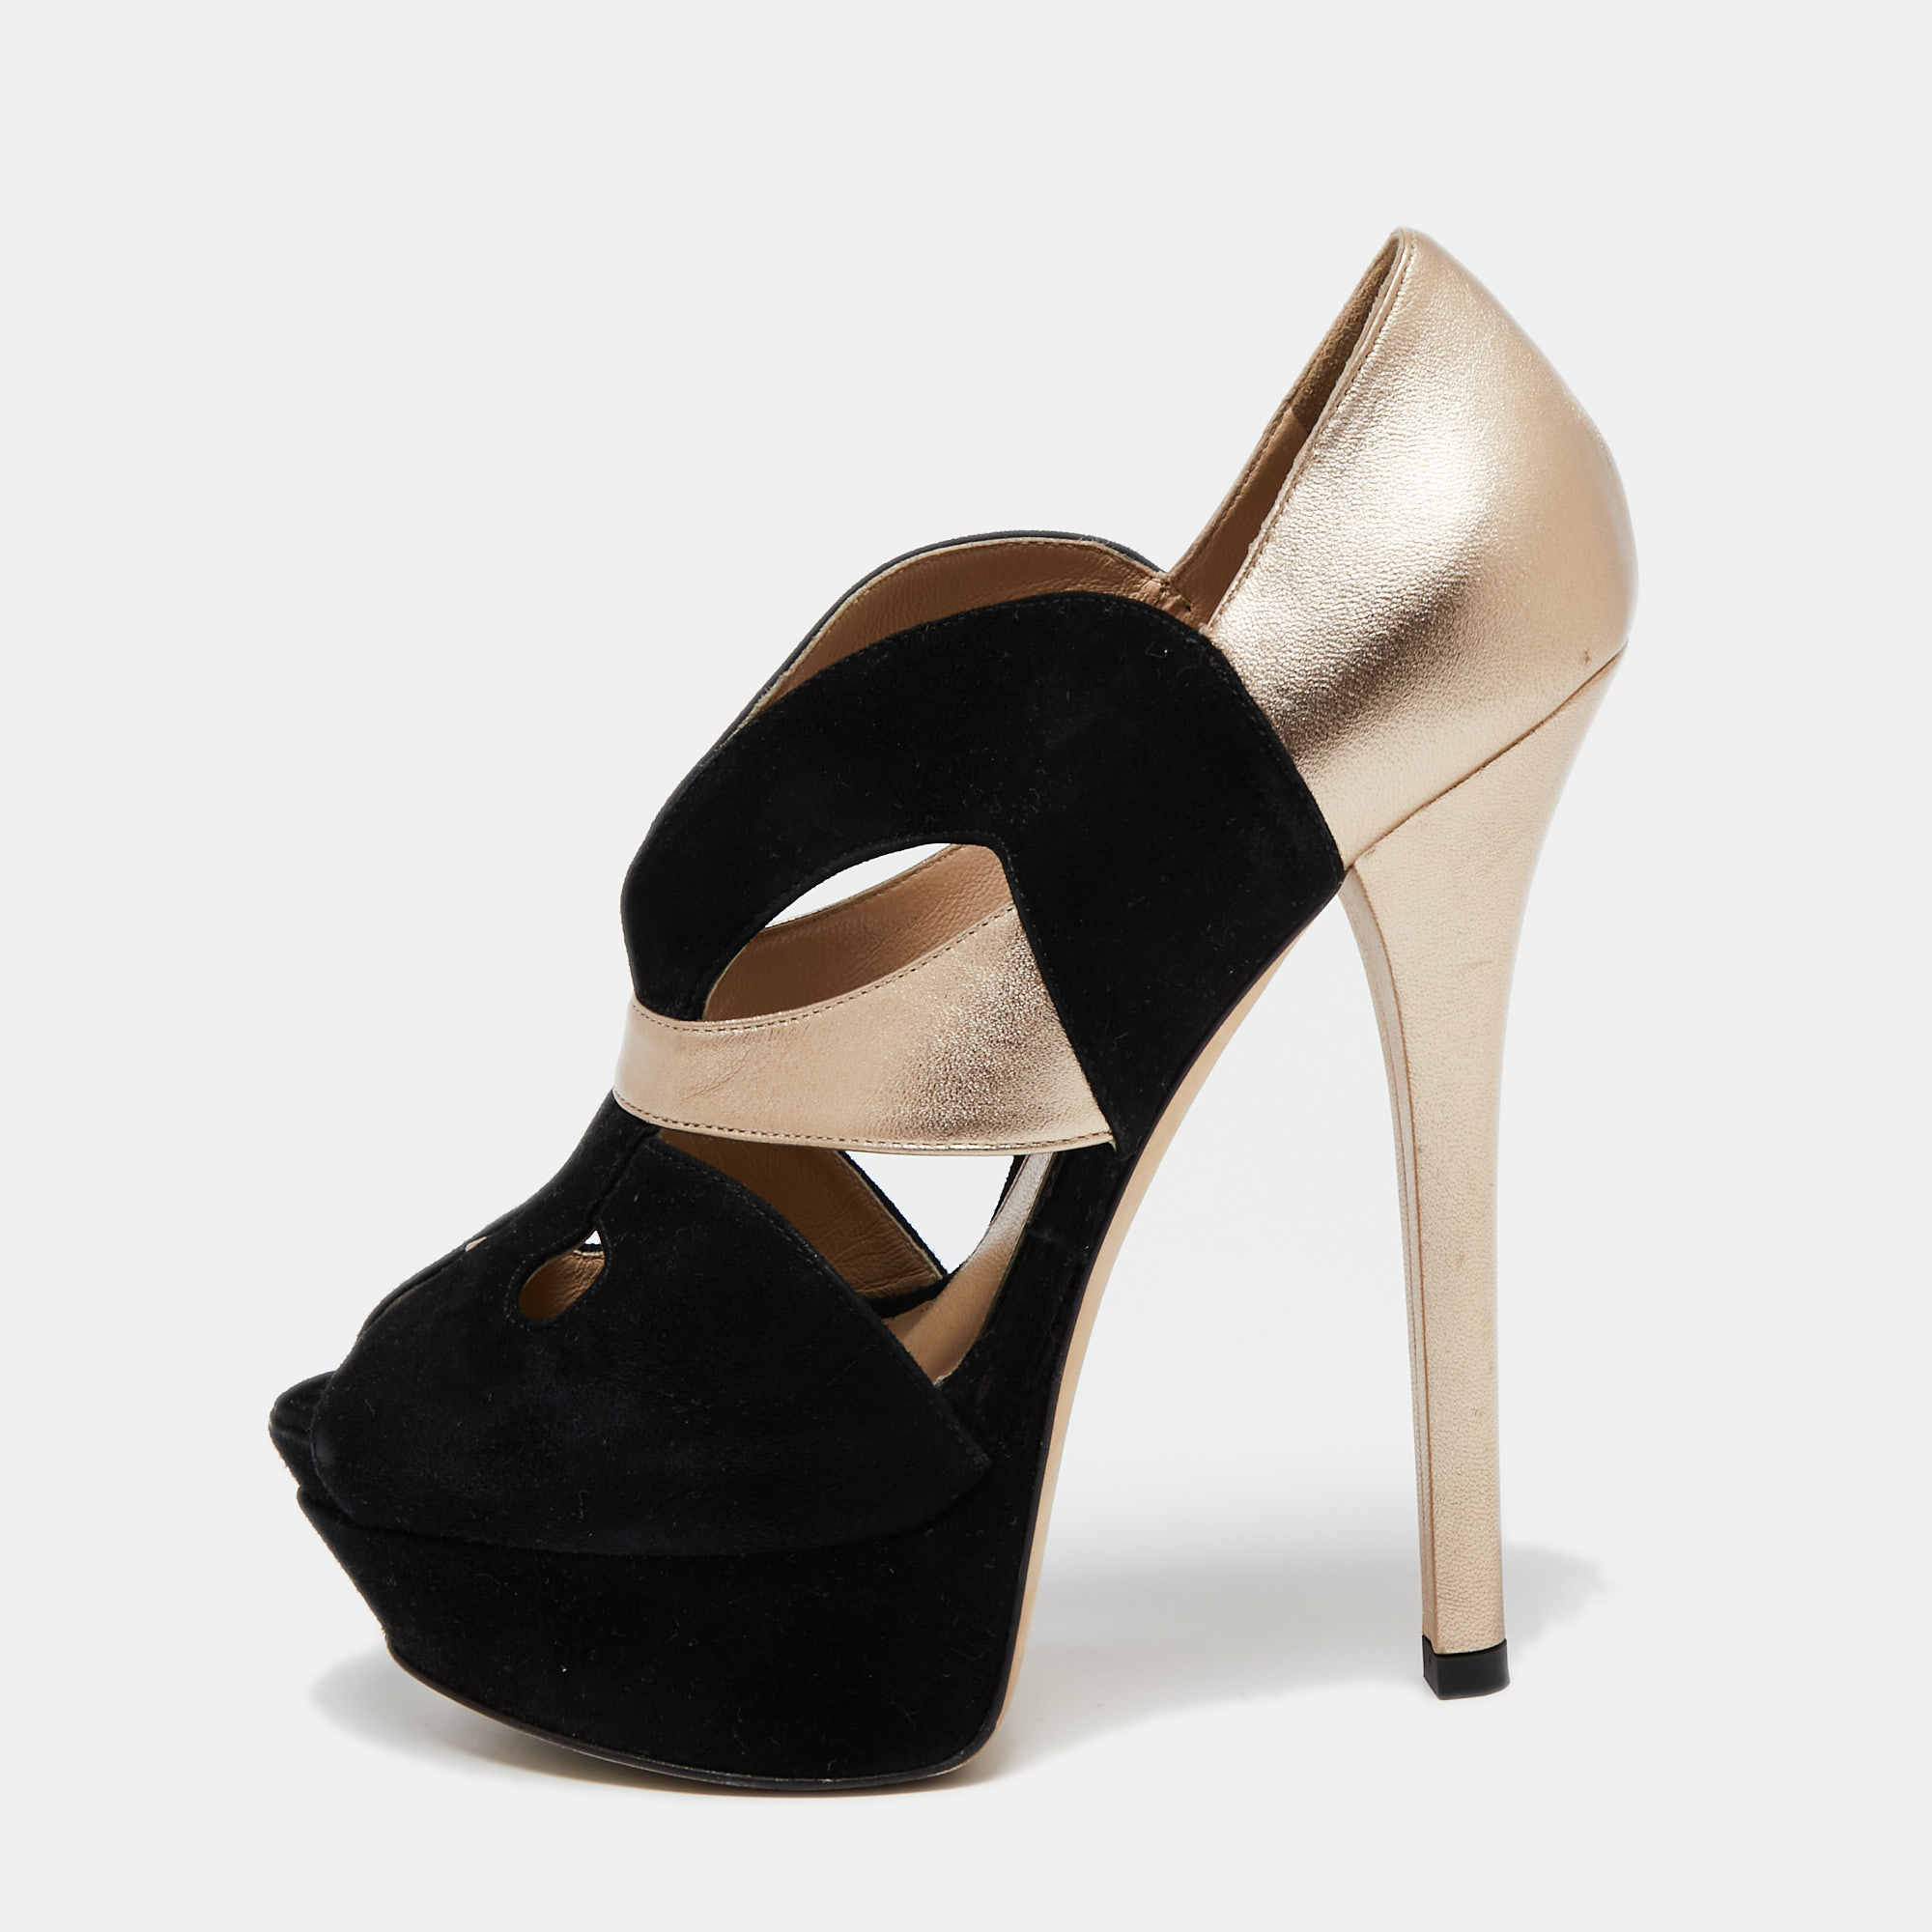 With precise cut out detailing this pair of Fendi pumps is the perfect inspiration for a stylish look. It is created from leather and suede with its 15cm heels mounted on platforms for a smooth walking experience.